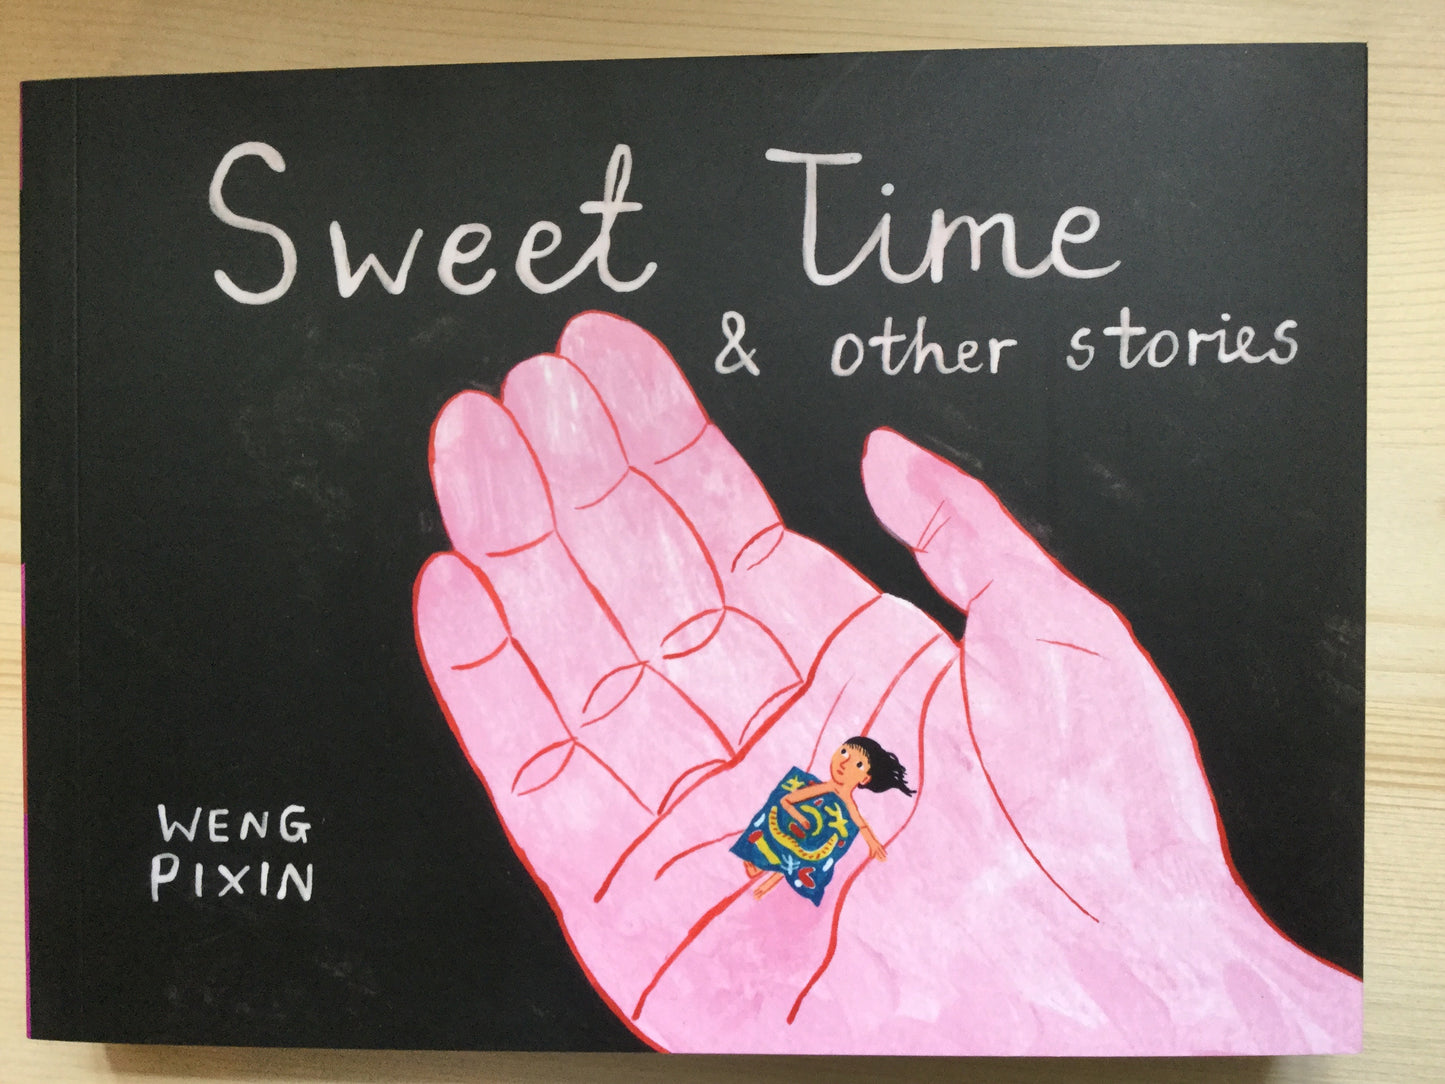 Sweet Time & other stories